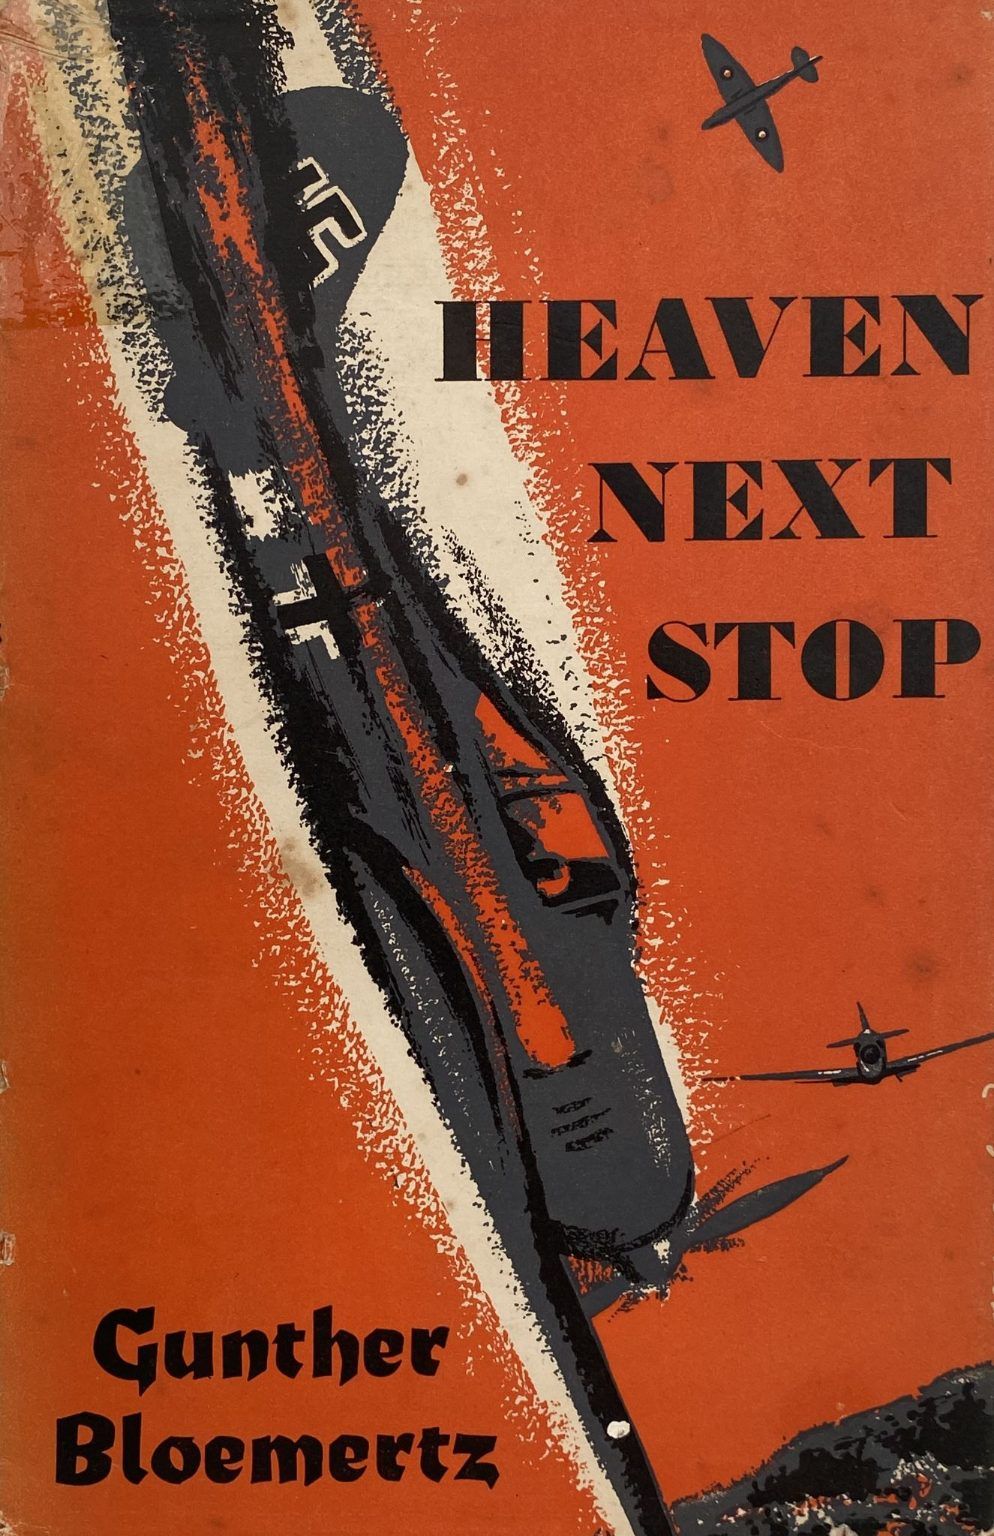 HEAVEN NEXT STOP: Impressions of a German Fighter Pilot